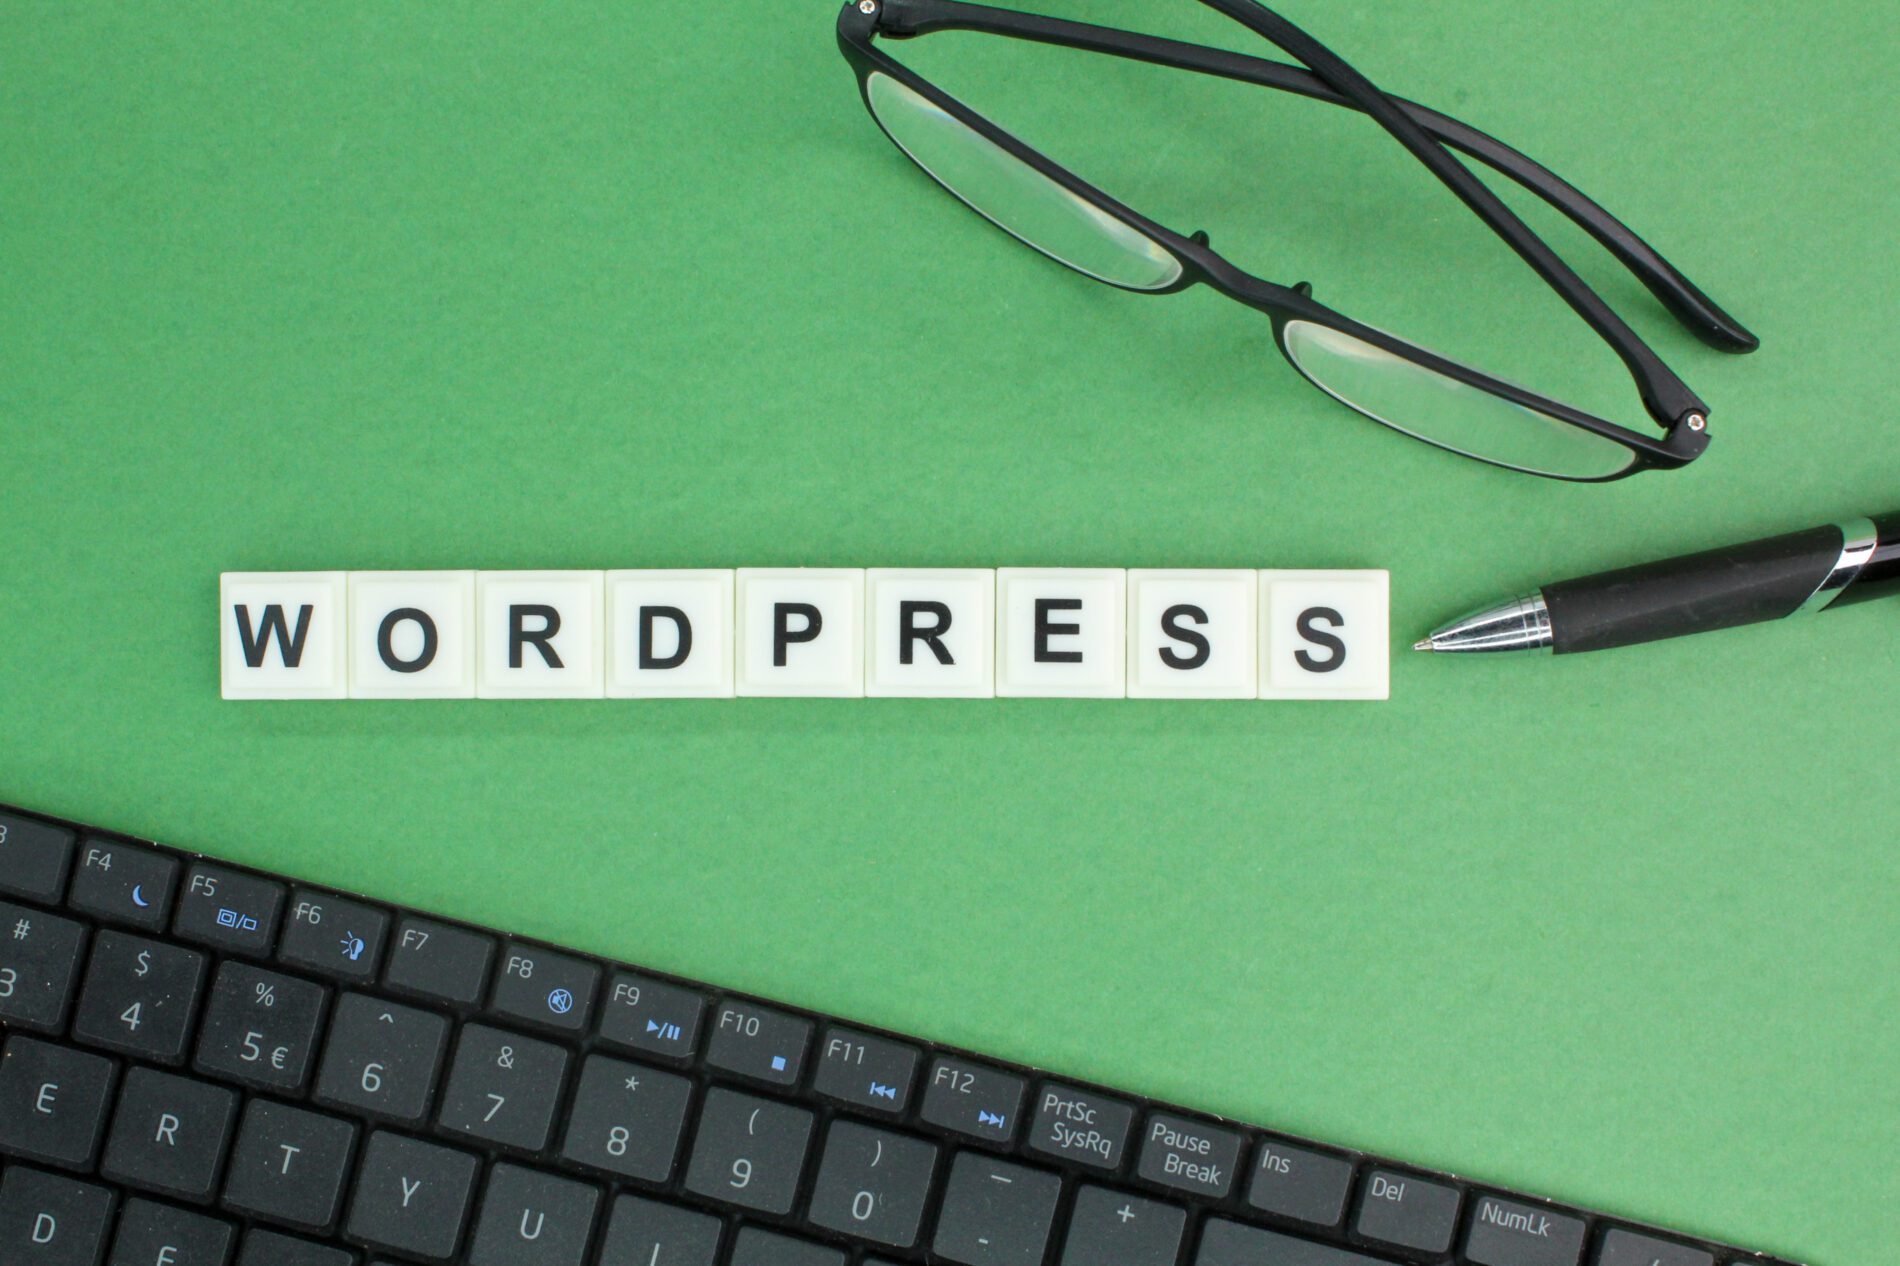 Thinking Of Starting A Wordpress Web Design Business – Here Are 7 Things You Must Do